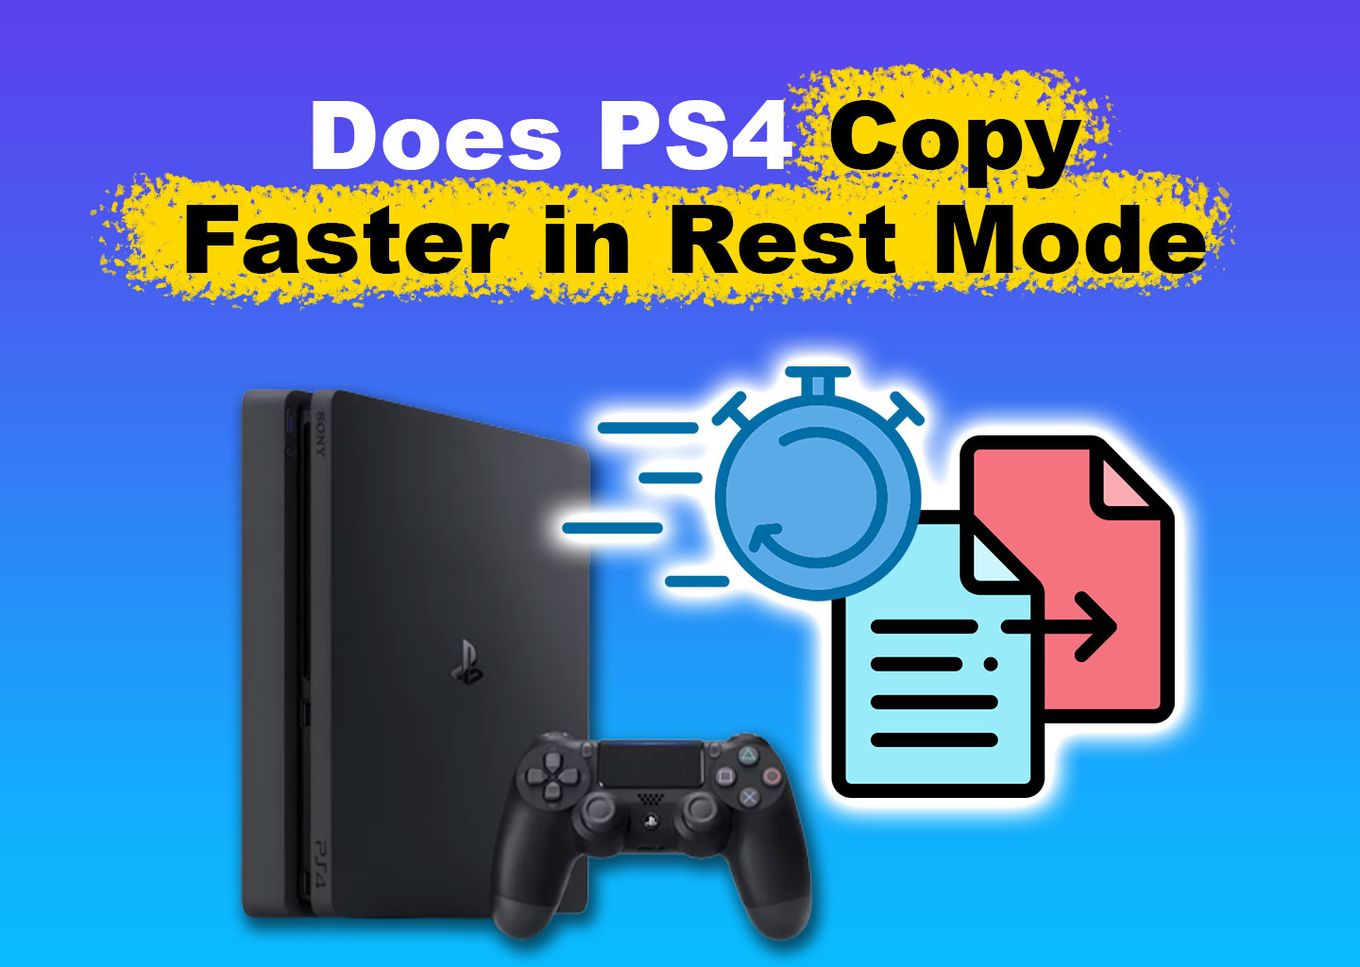 Does PS4 Copy Faster in Rest Mode